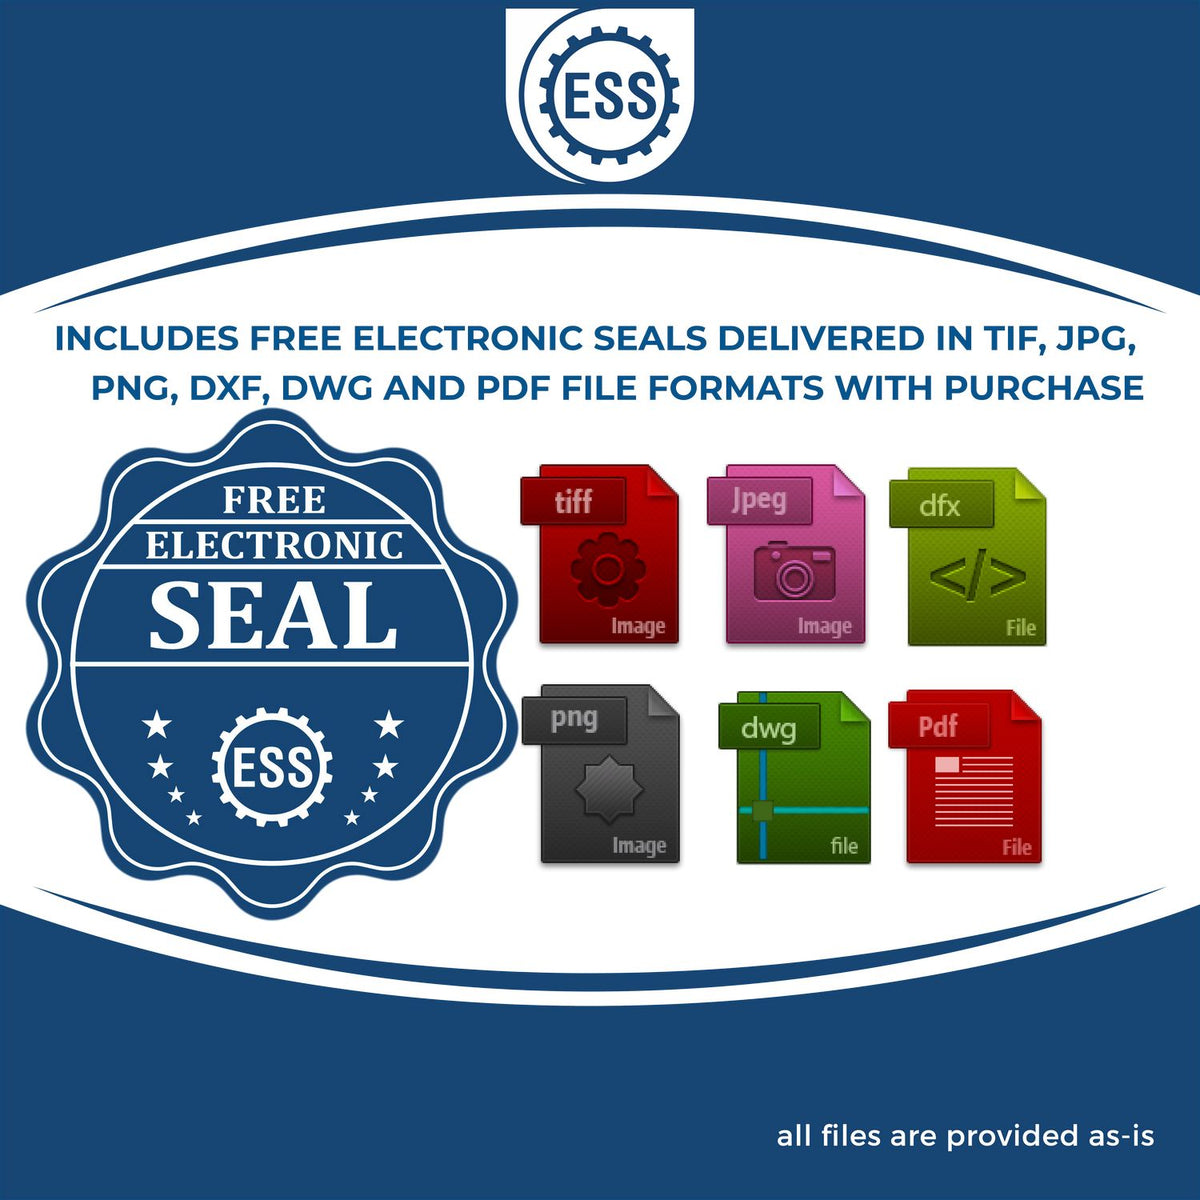 An infographic for the free electronic seal for the Extended Long Reach Georgia Surveyor Embosser illustrating the different file type icons such as DXF, DWG, TIF, JPG and PNG.